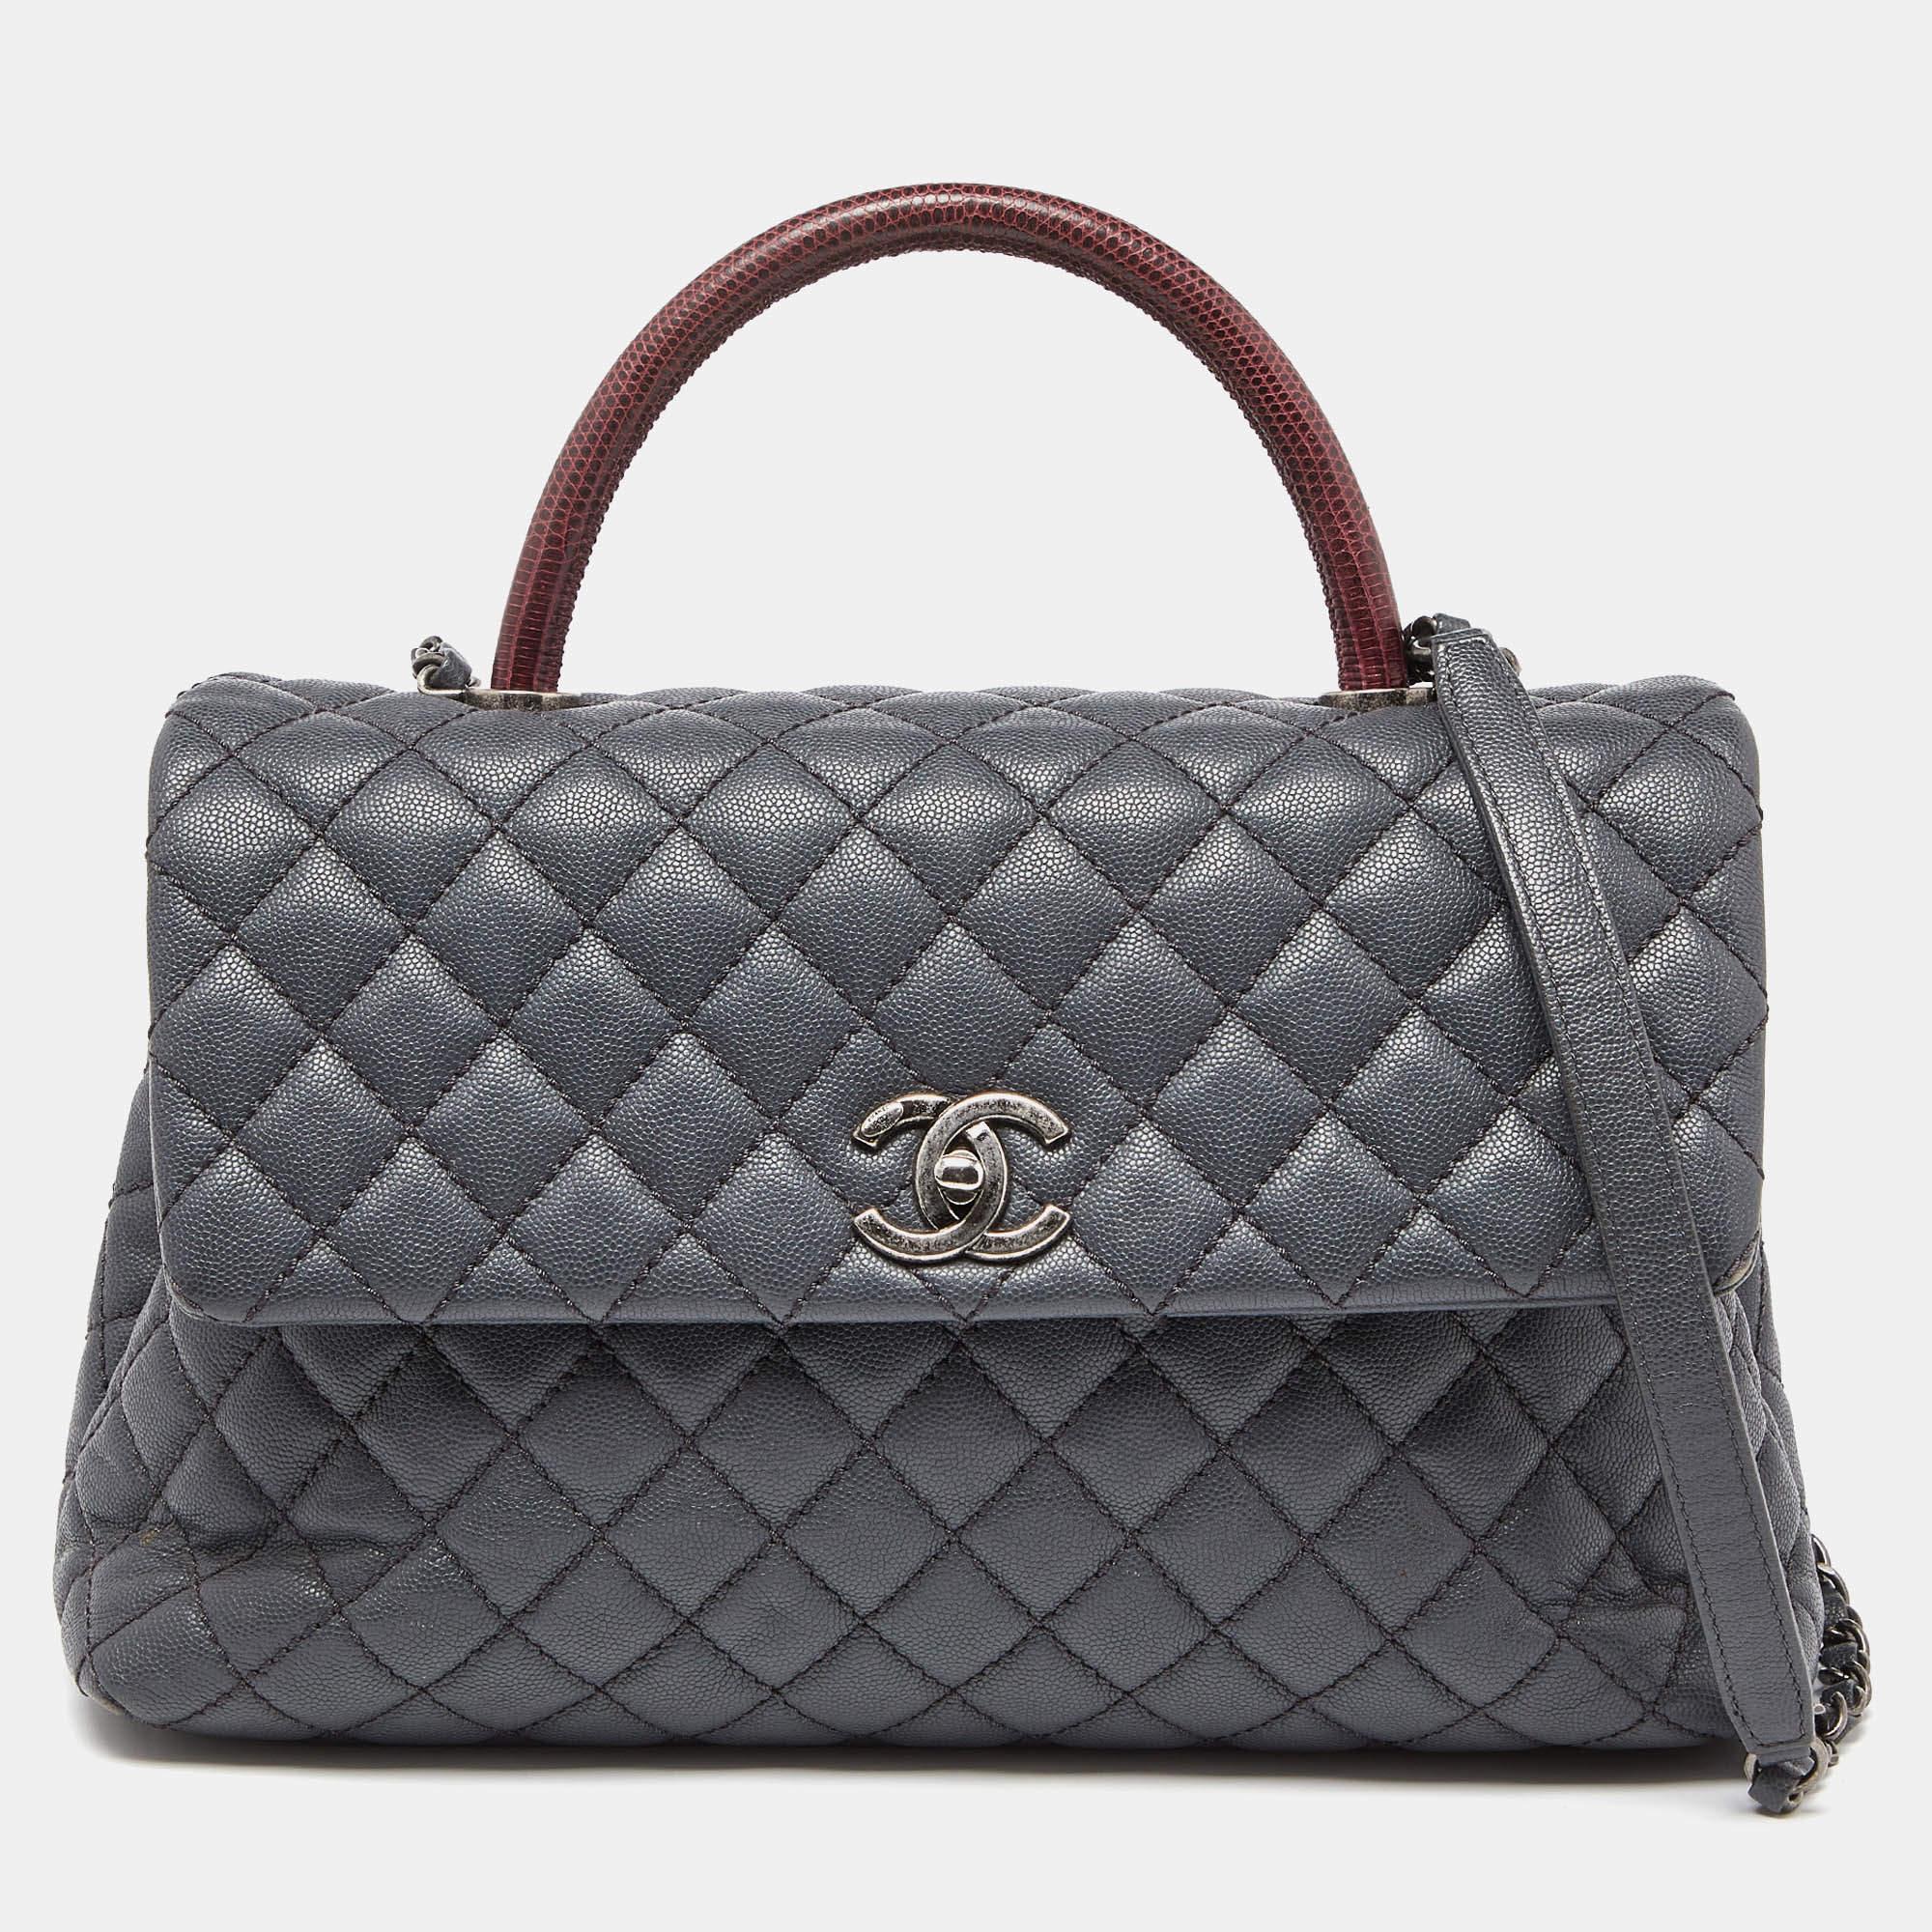 Chanel Grey/Red Caviar Leather and Lizard Leather Medium Coco Top Handle Bag 6